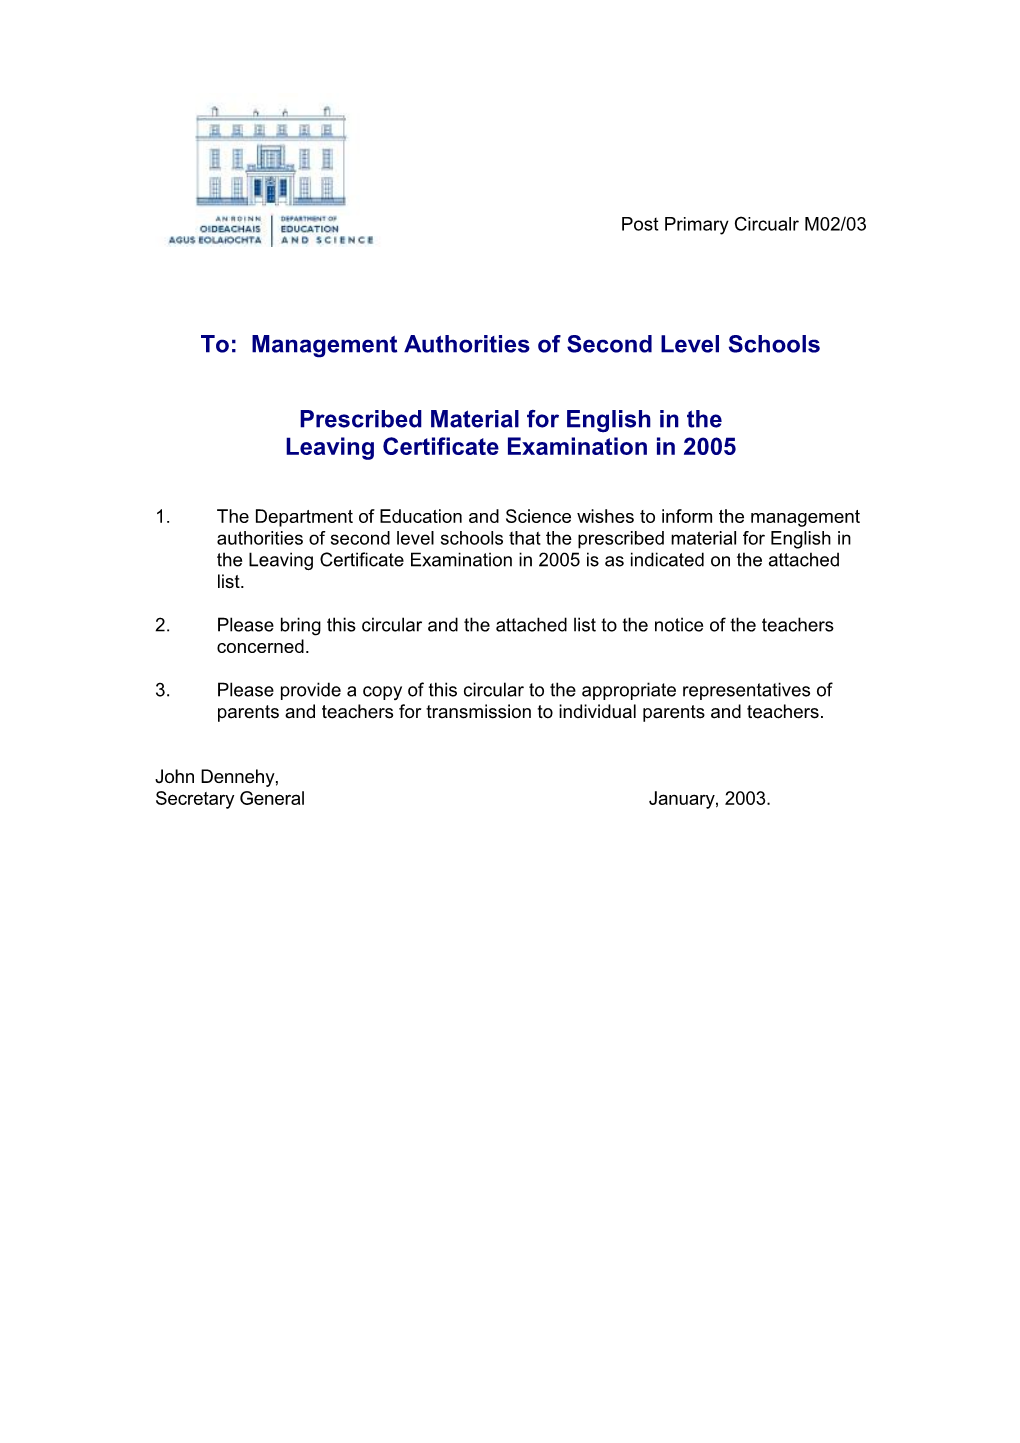 Post Primary Circular M02/03 - Prescribed Material for English in the (Word Format 78KB)